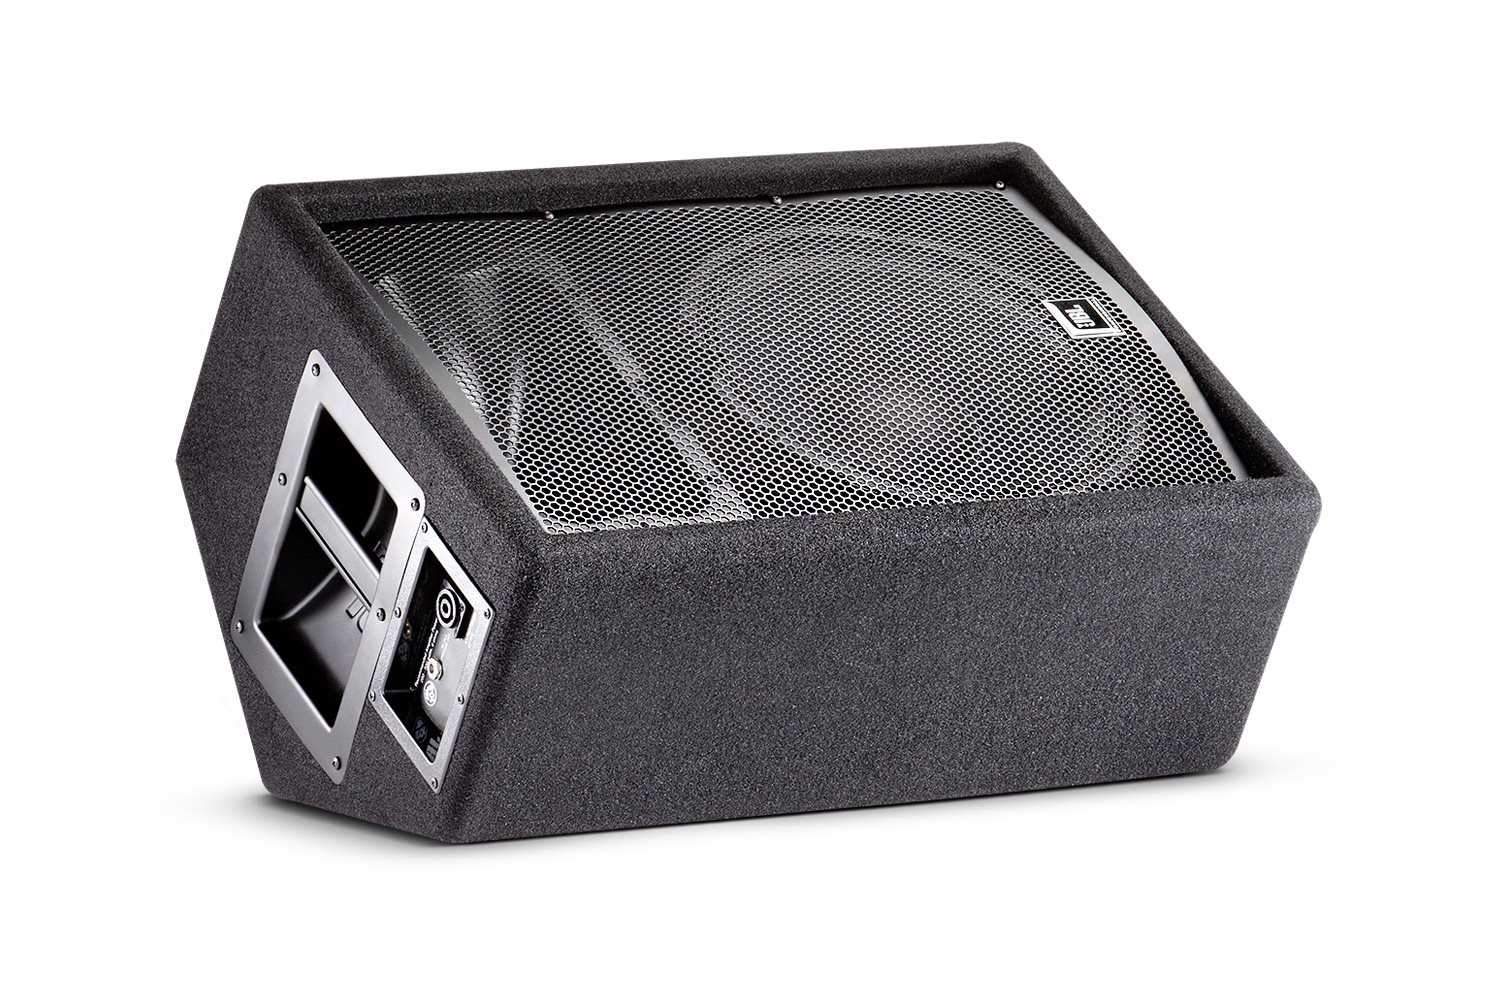 JBL JRX212 12-Inch 2-Way Passive Stage Monitor - PSSL ProSound and Stage Lighting